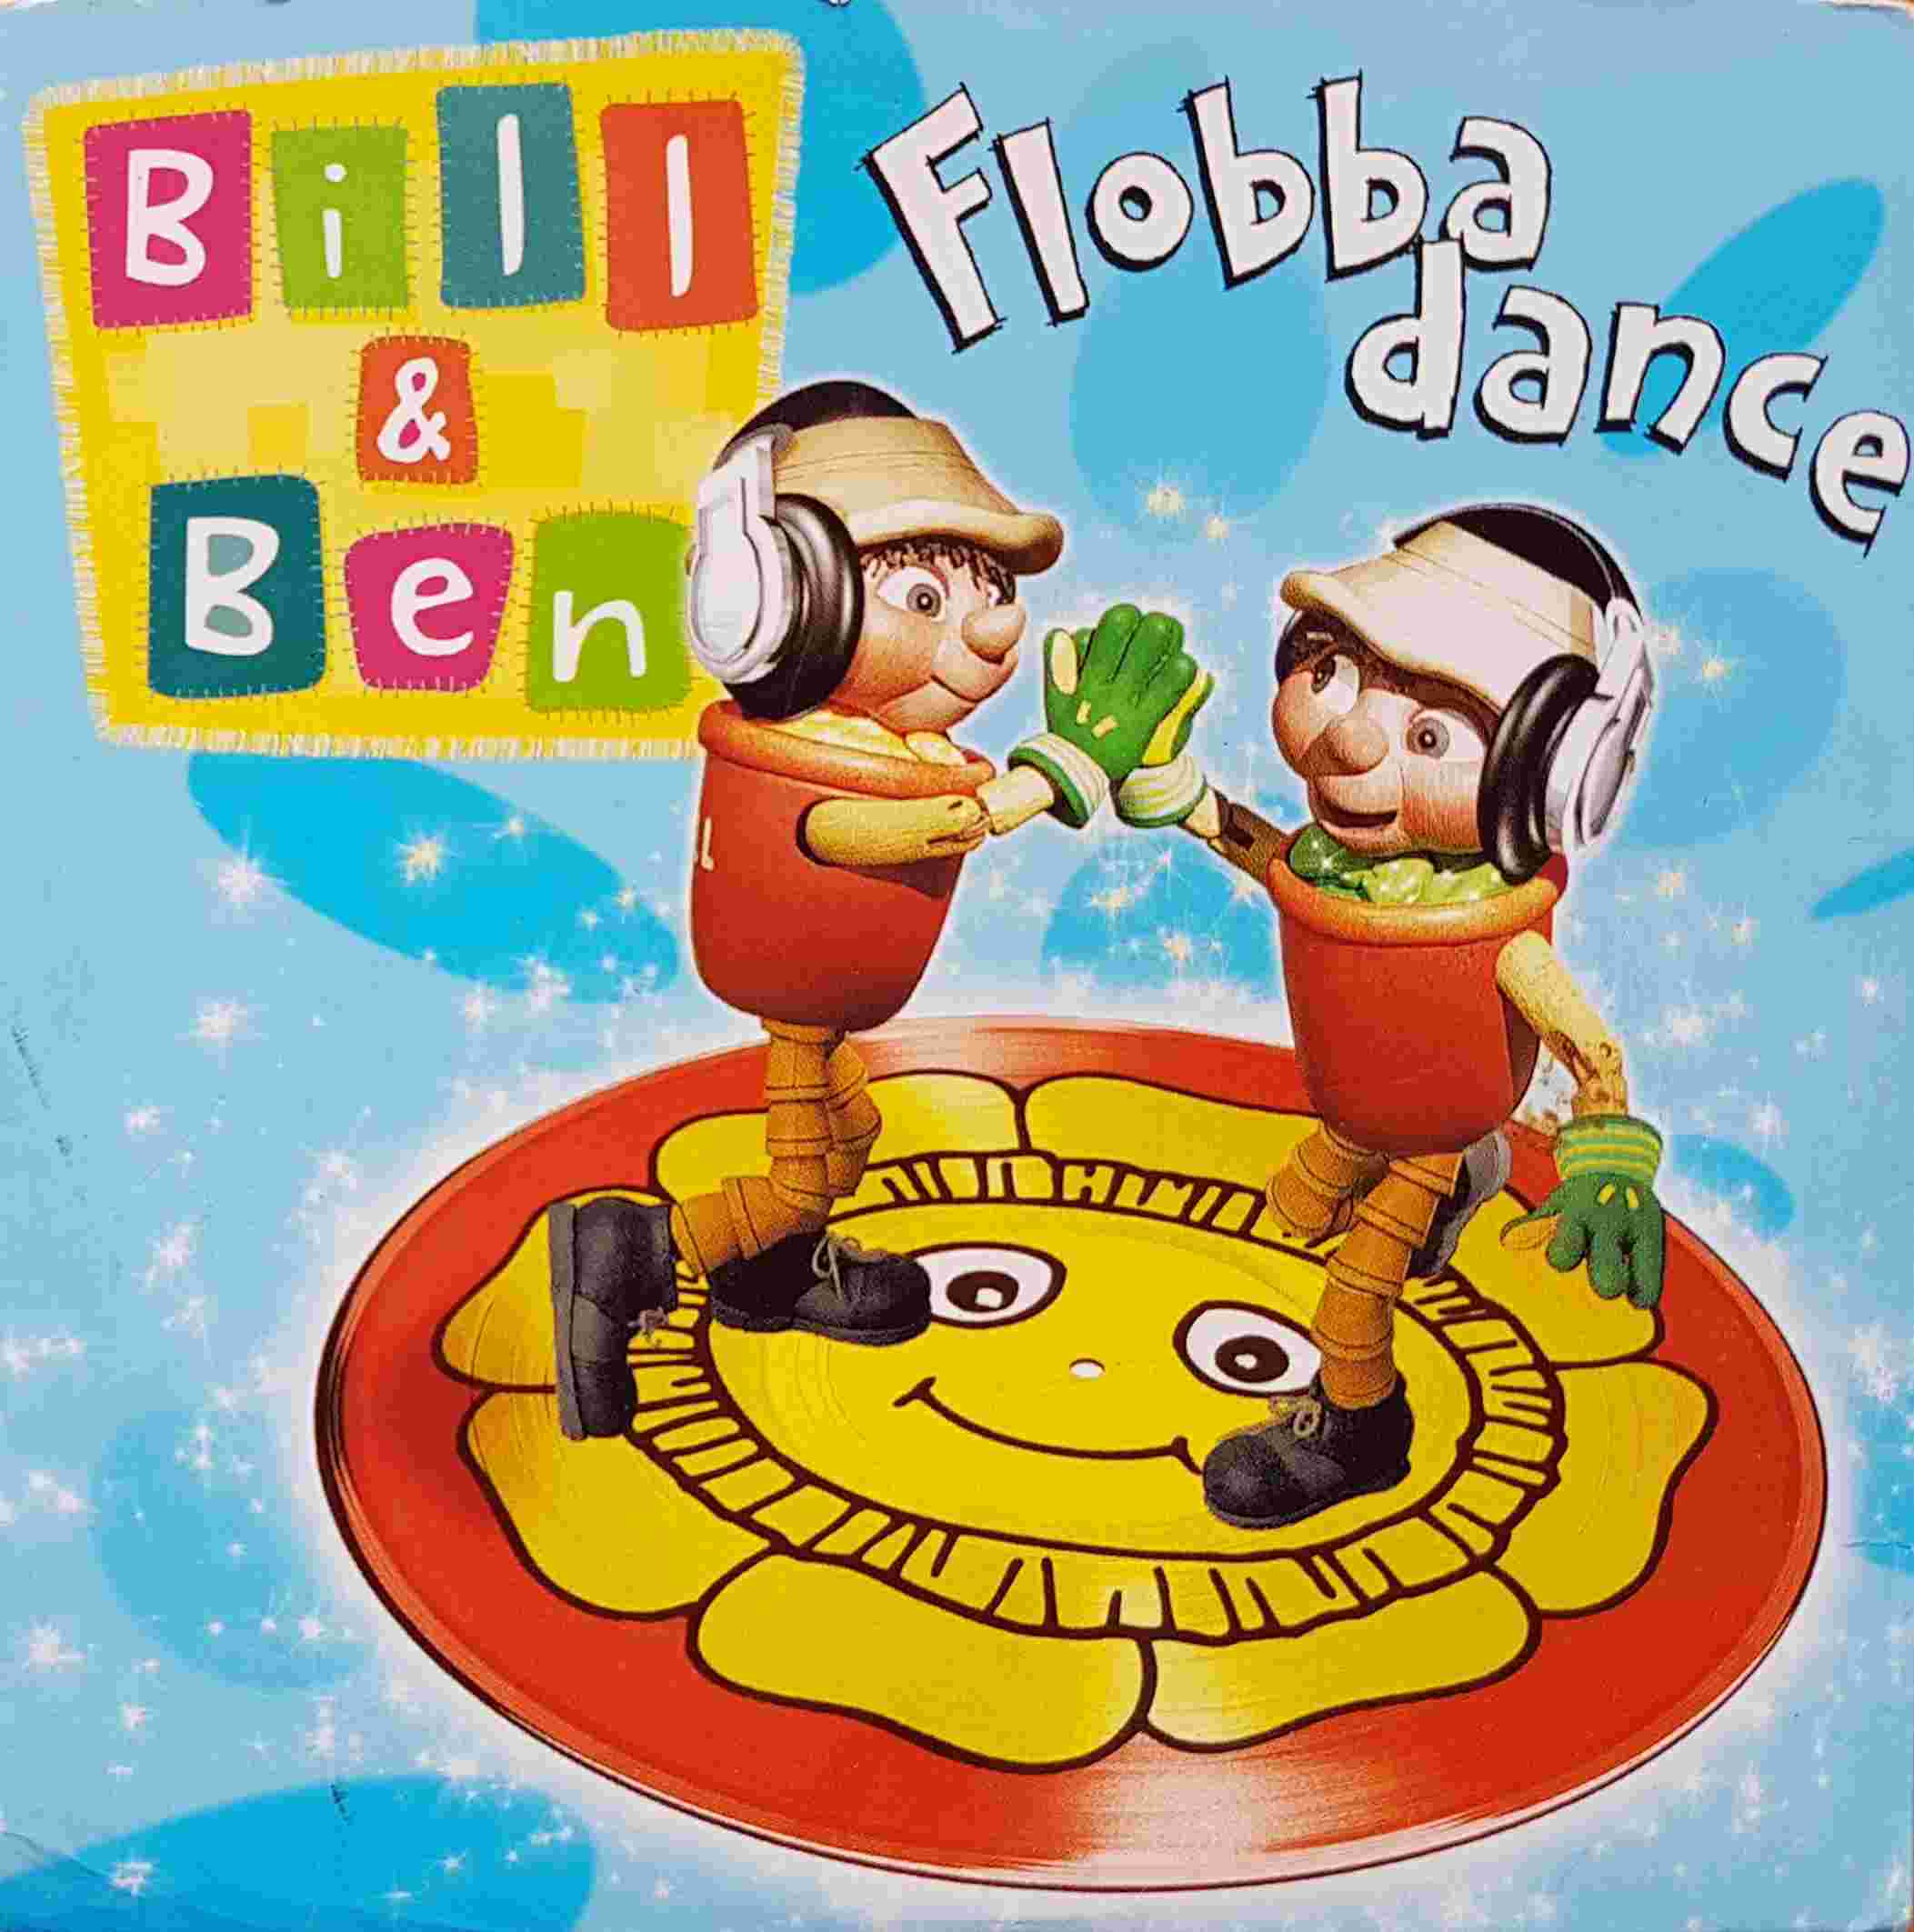 Picture of Flobbadance by artist Bill & Ben / Nico Dean from the BBC cdsingles - Records and Tapes library